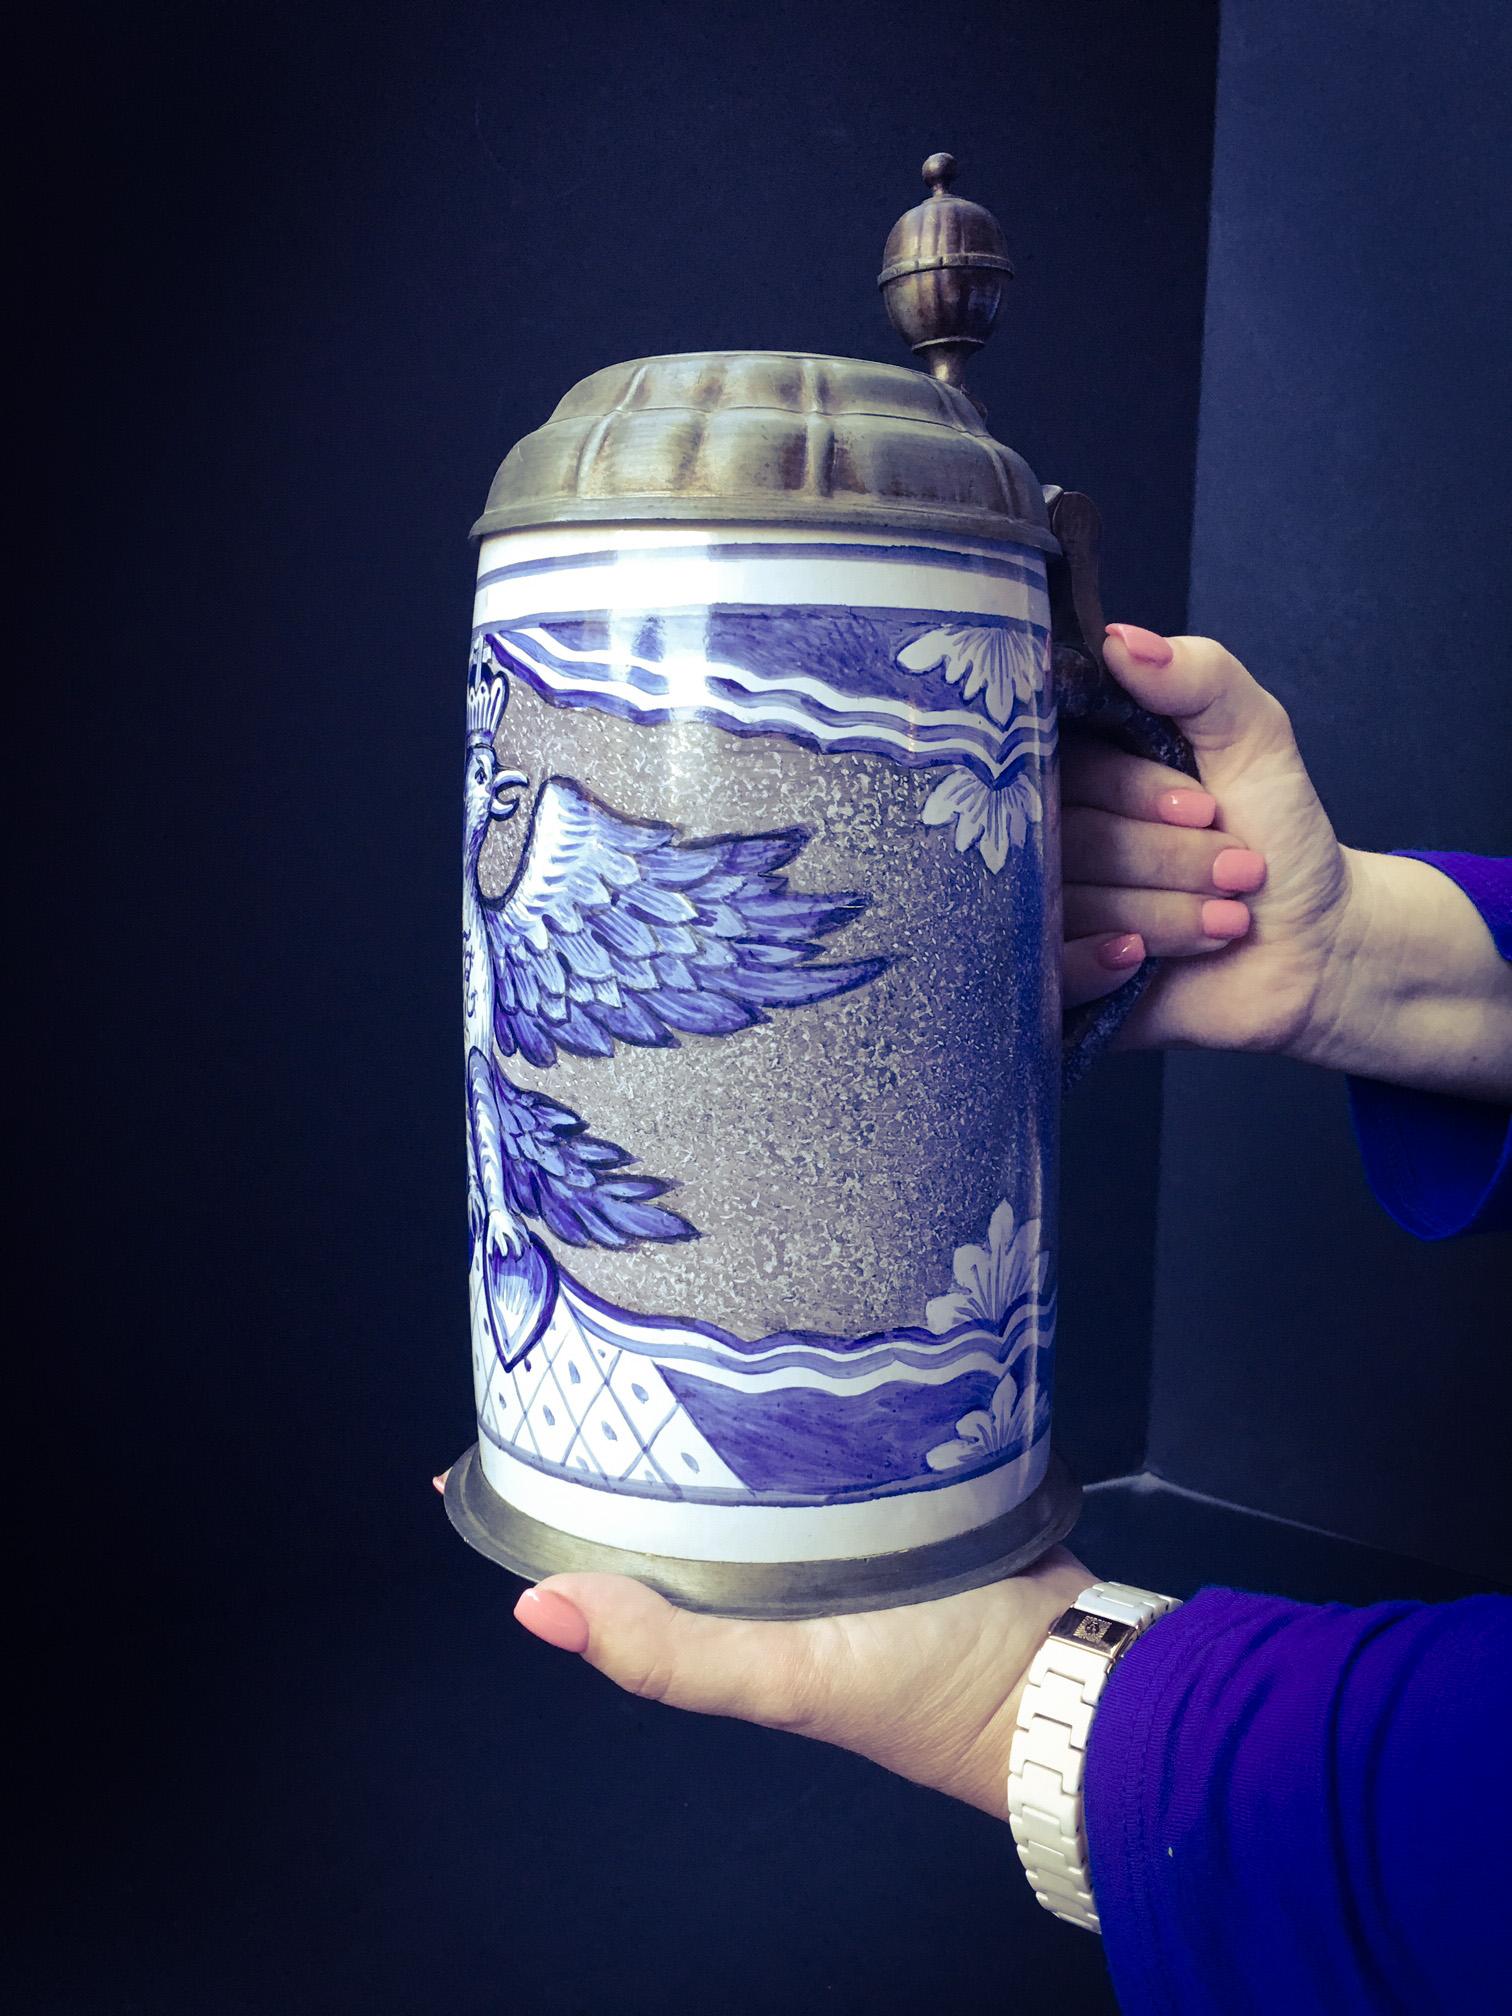 This exceptional large faience tankard is painted polychrome with the royal eagle and crest of Frederick the Great of Prussia. The initial FR stands for Fridericus Rex. The background of this tankard is decorated in a rare sponged manganese color.